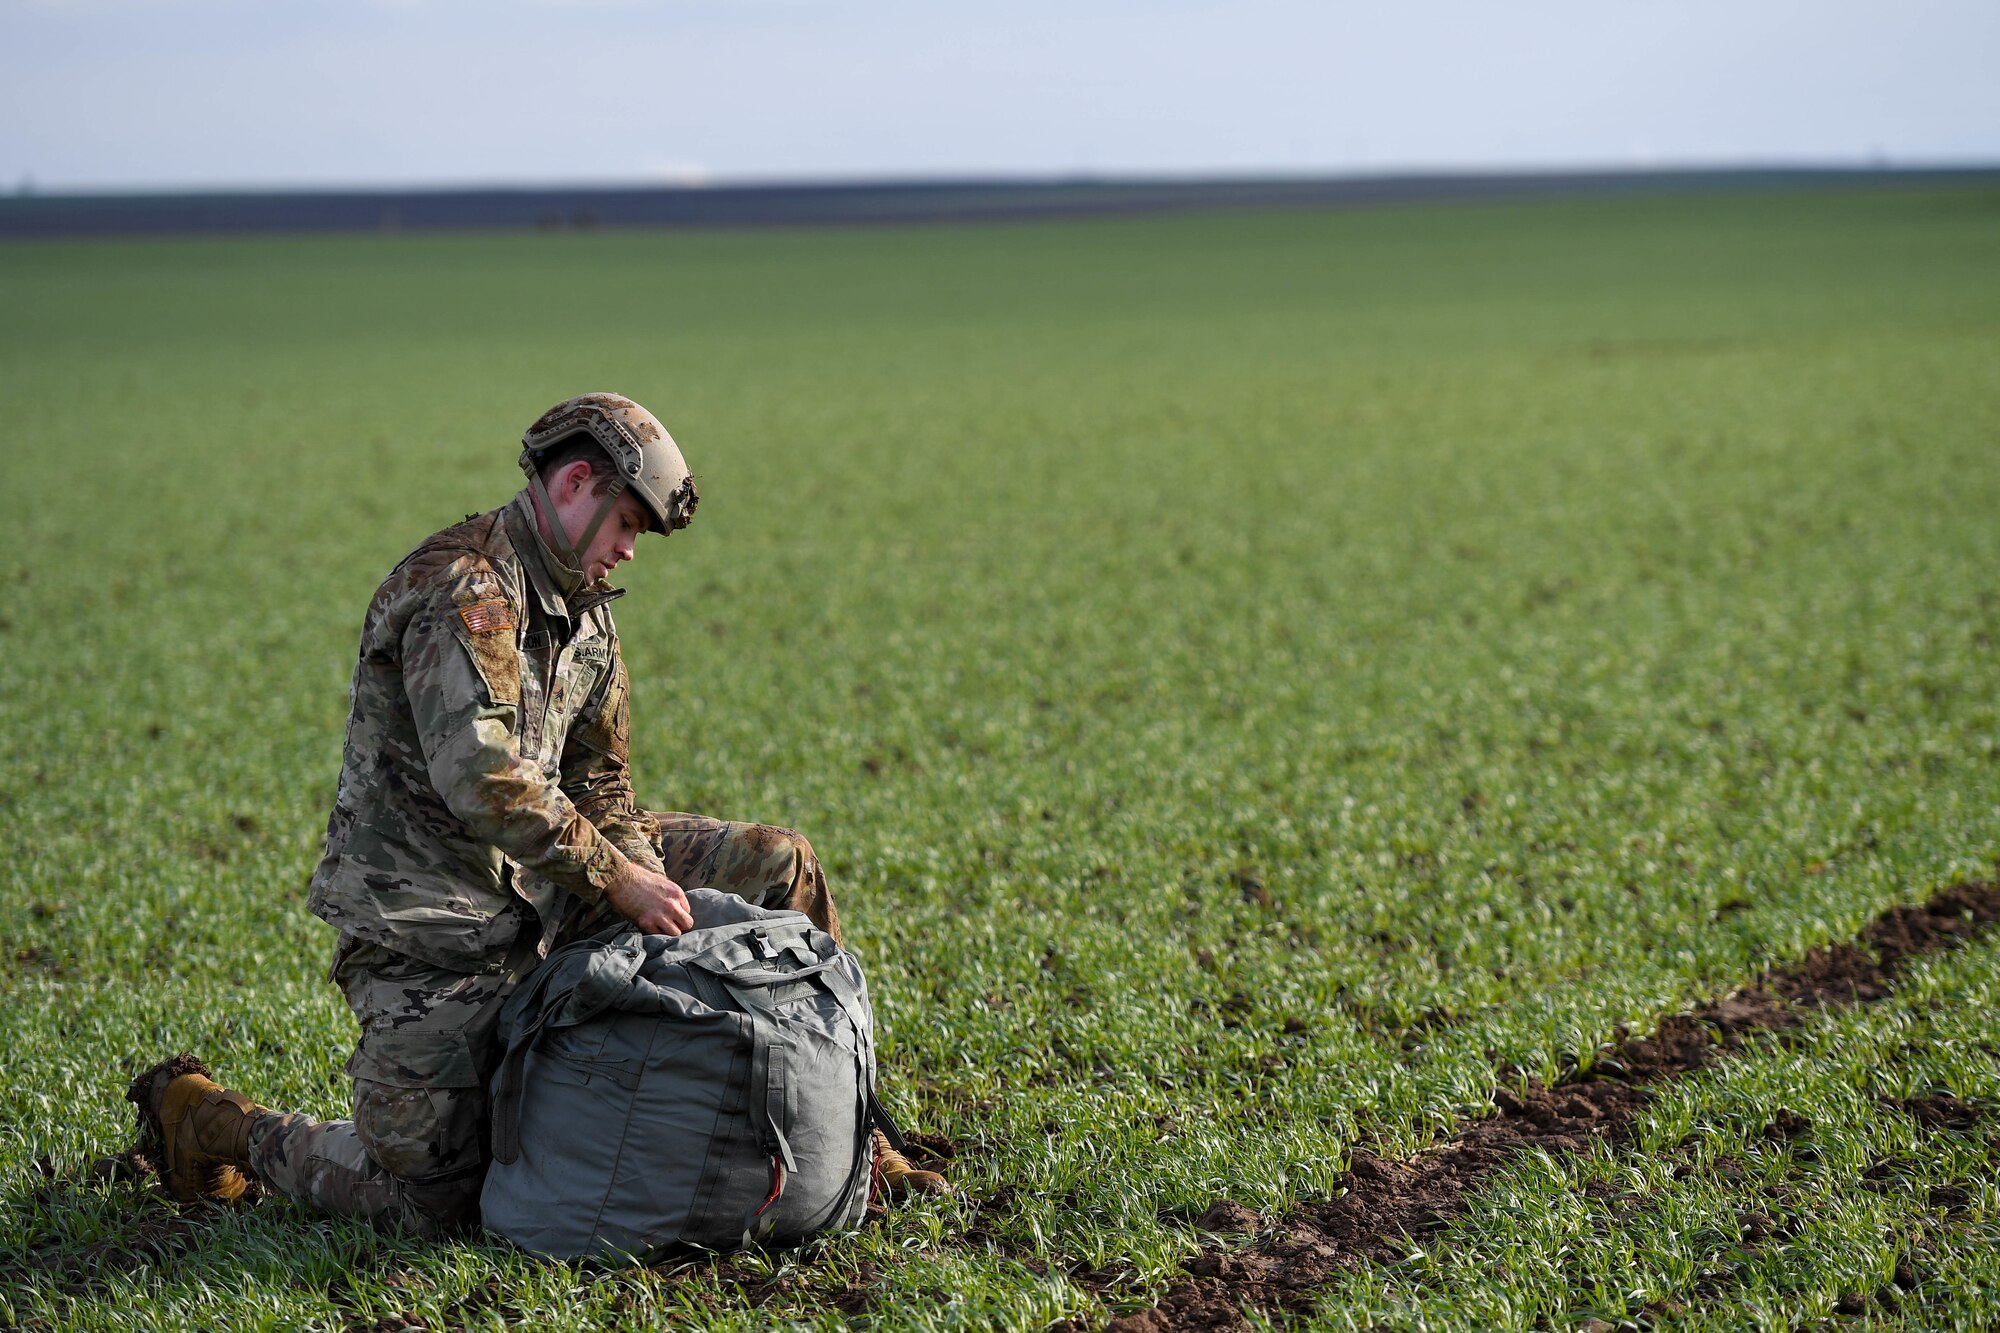 U.S. Army Sgt. Austin Nicholson, 1st Battalion, 10th Special Forces Group, collects his parachute after his jump into Alzey Drop Zone in Ober-Flörsheim, Germany, Jan. 20, 2023.